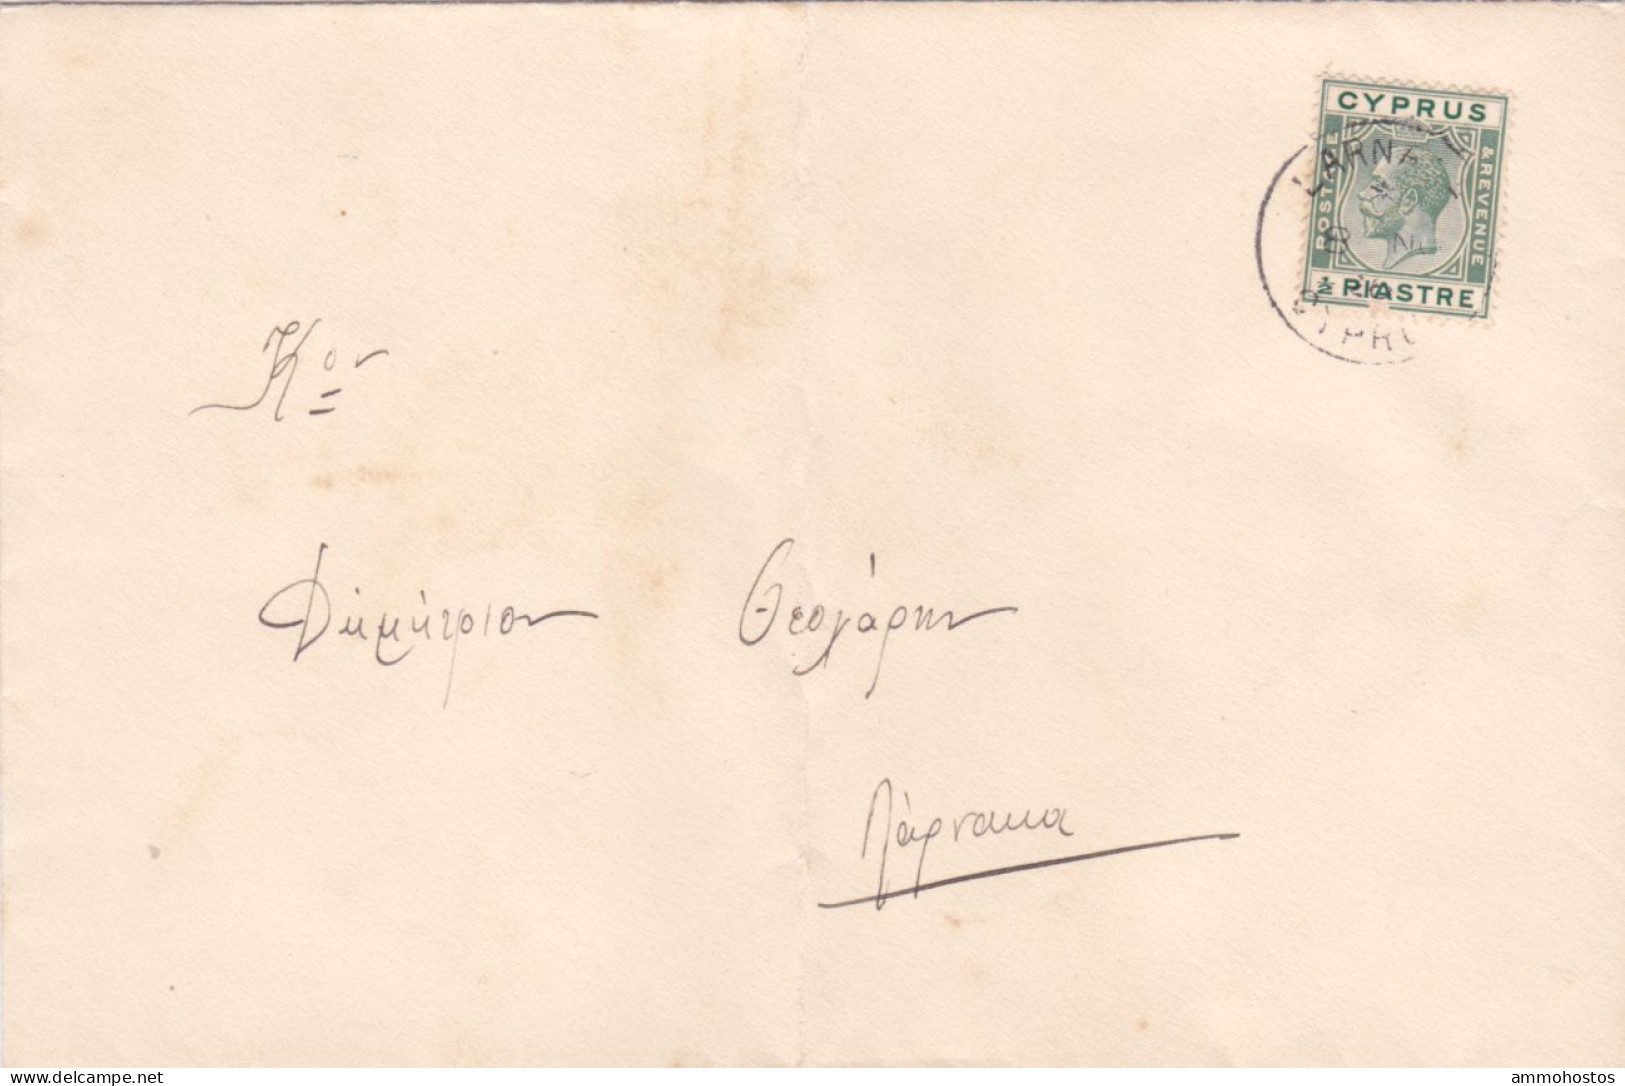 CYPRUS KGV LOCAL COVER LARNACA 1/2 PIASTRE RATE - Chypre (...-1960)